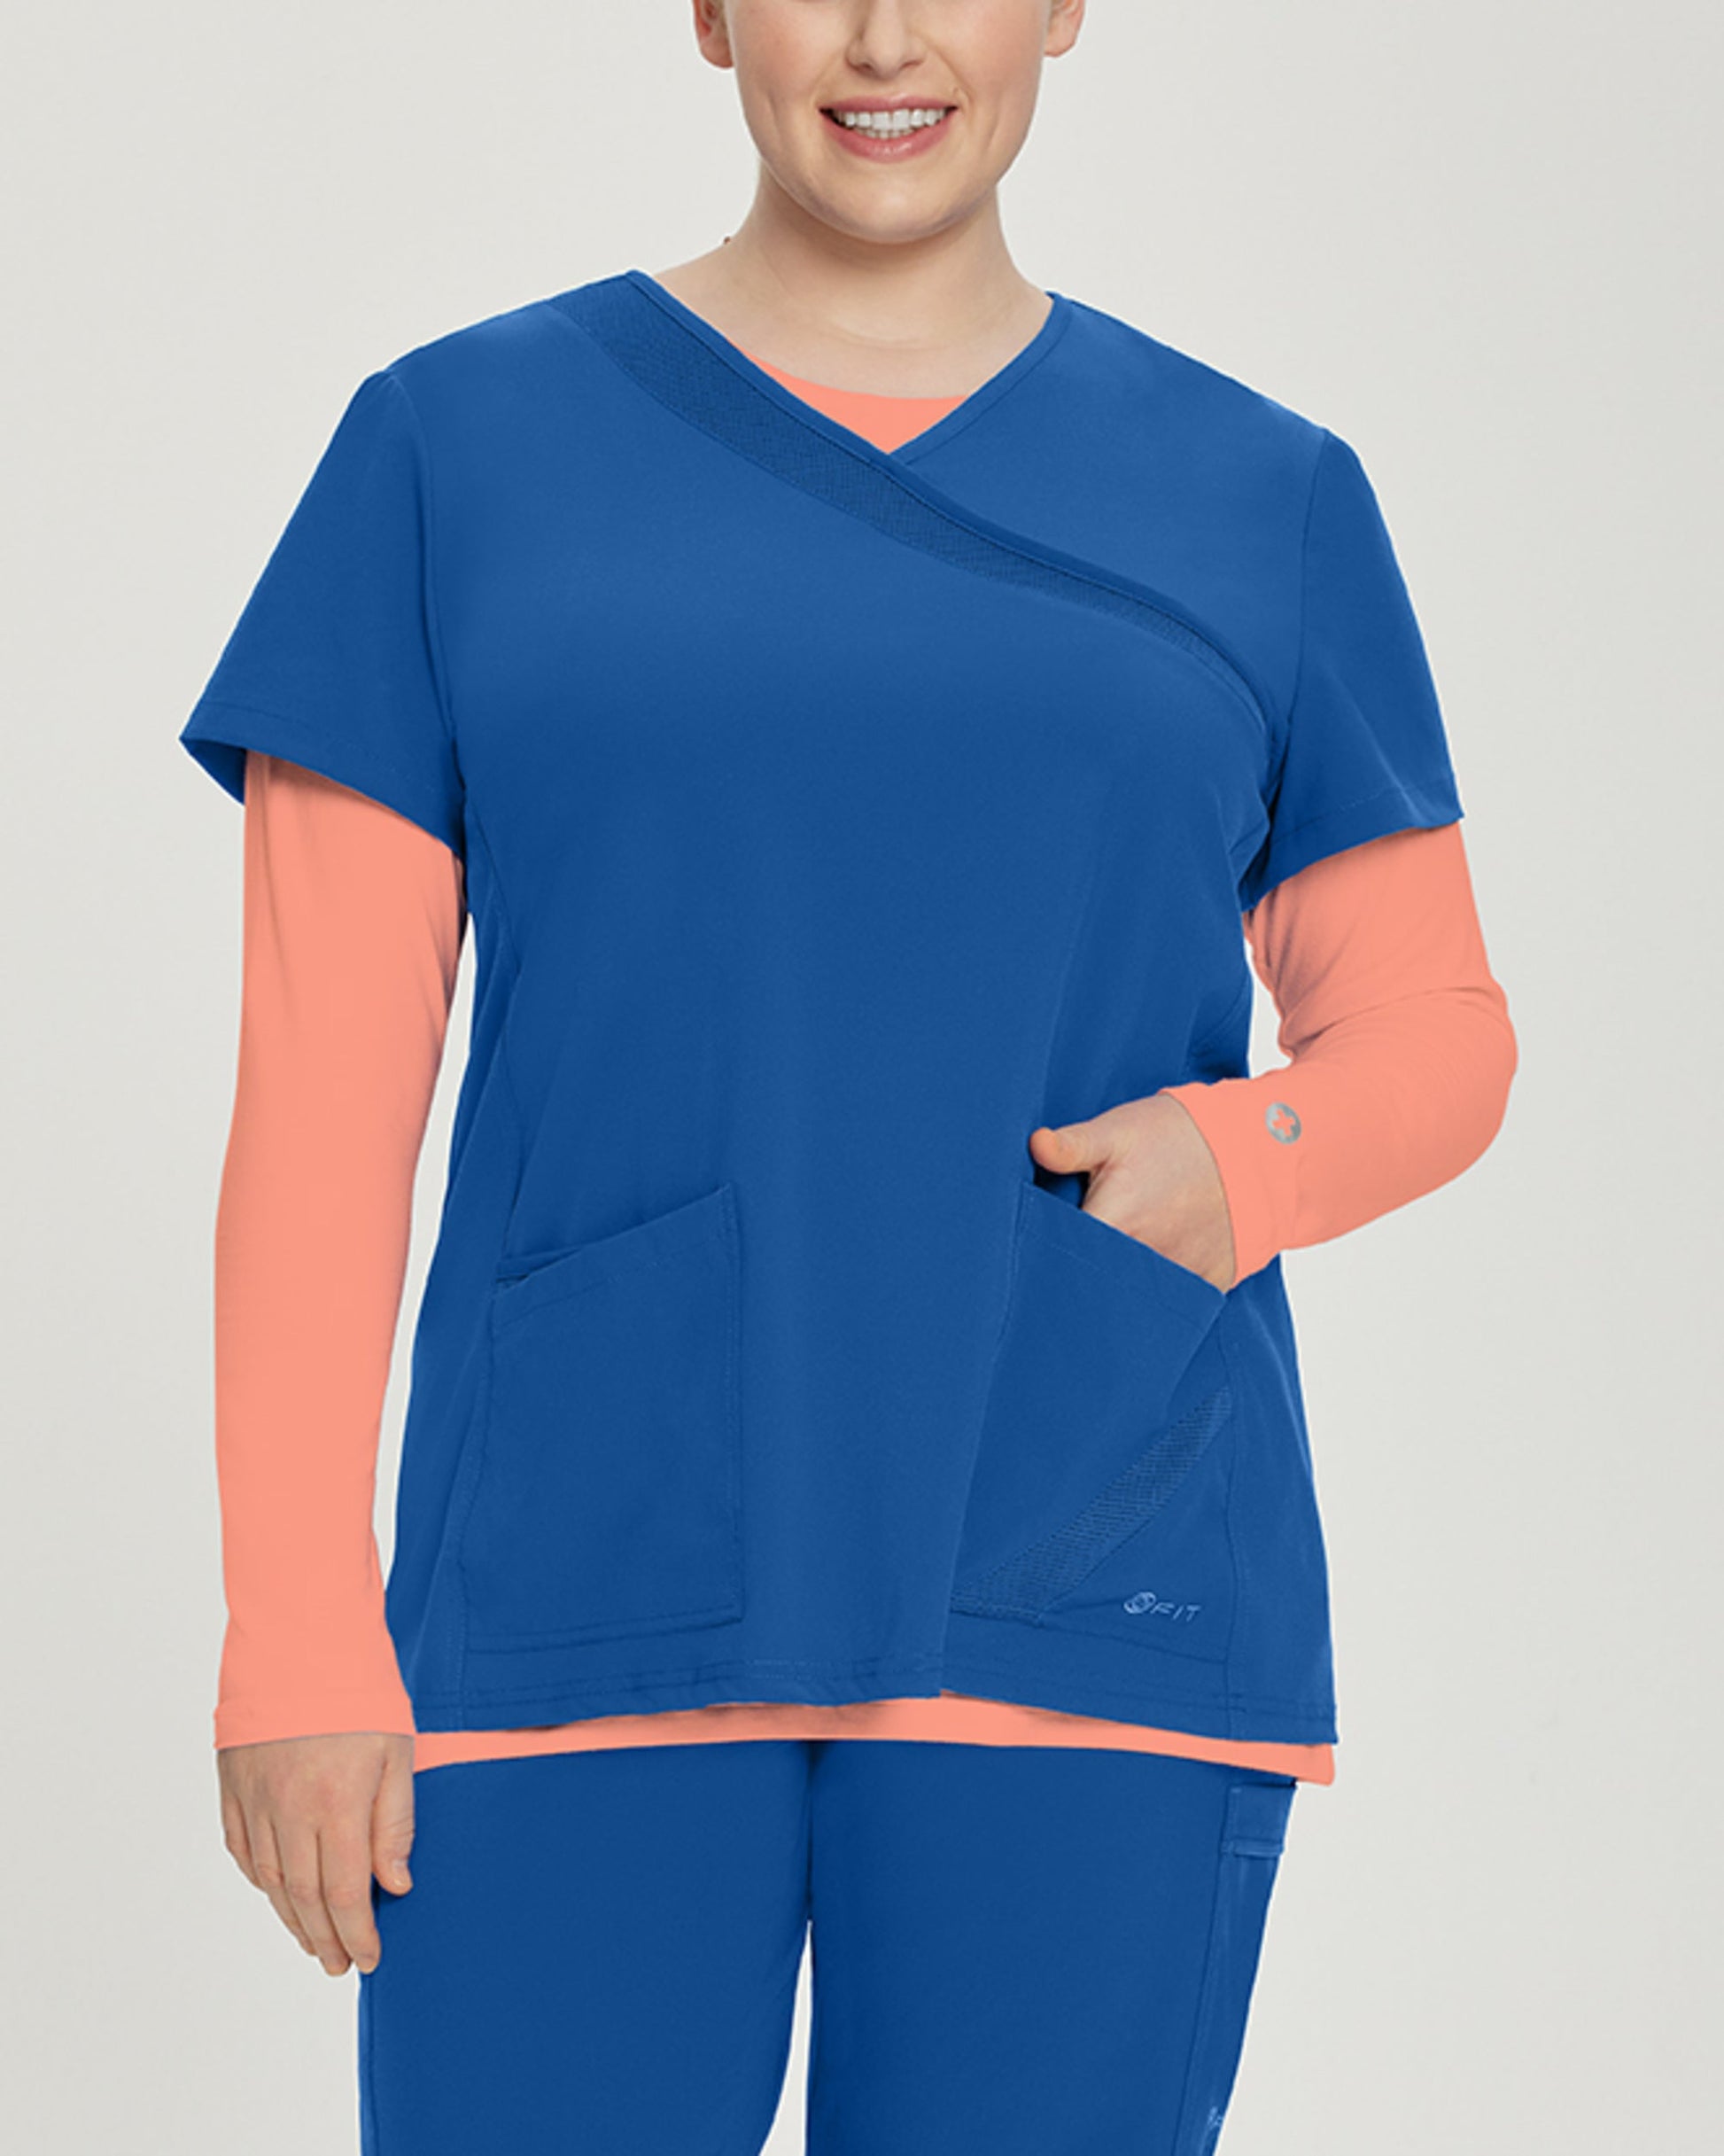 Buy Underscrubs For Mens & Womens for Doctors and Medical